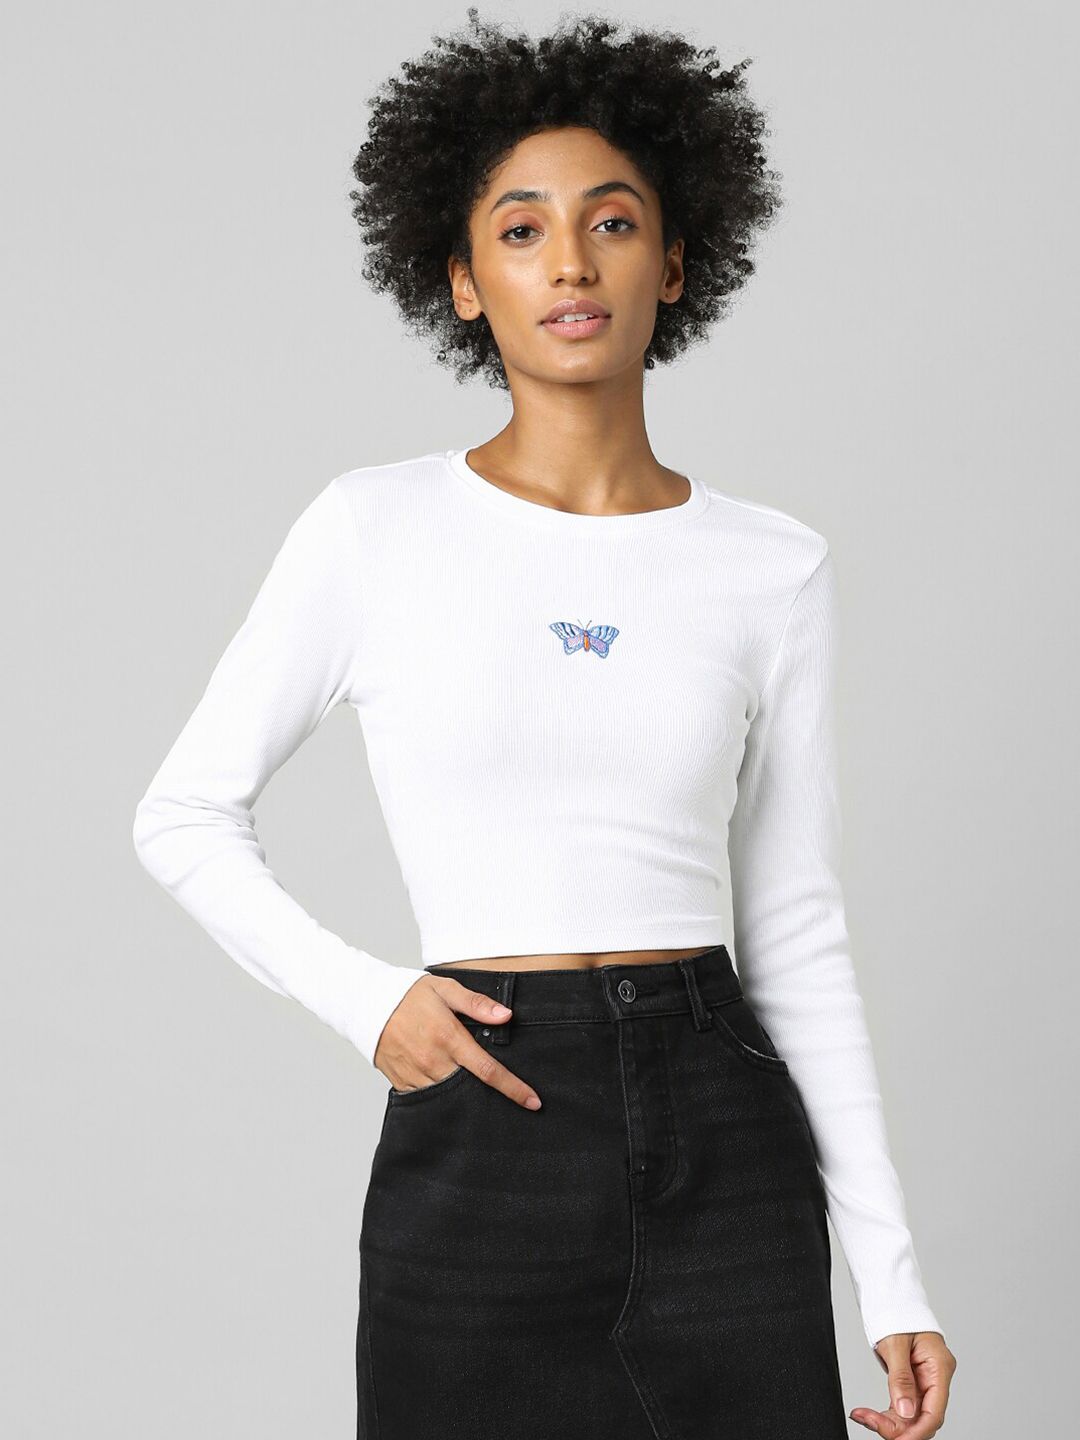 ONLY Women White Solid Full Sleeve Crop Top Price in India